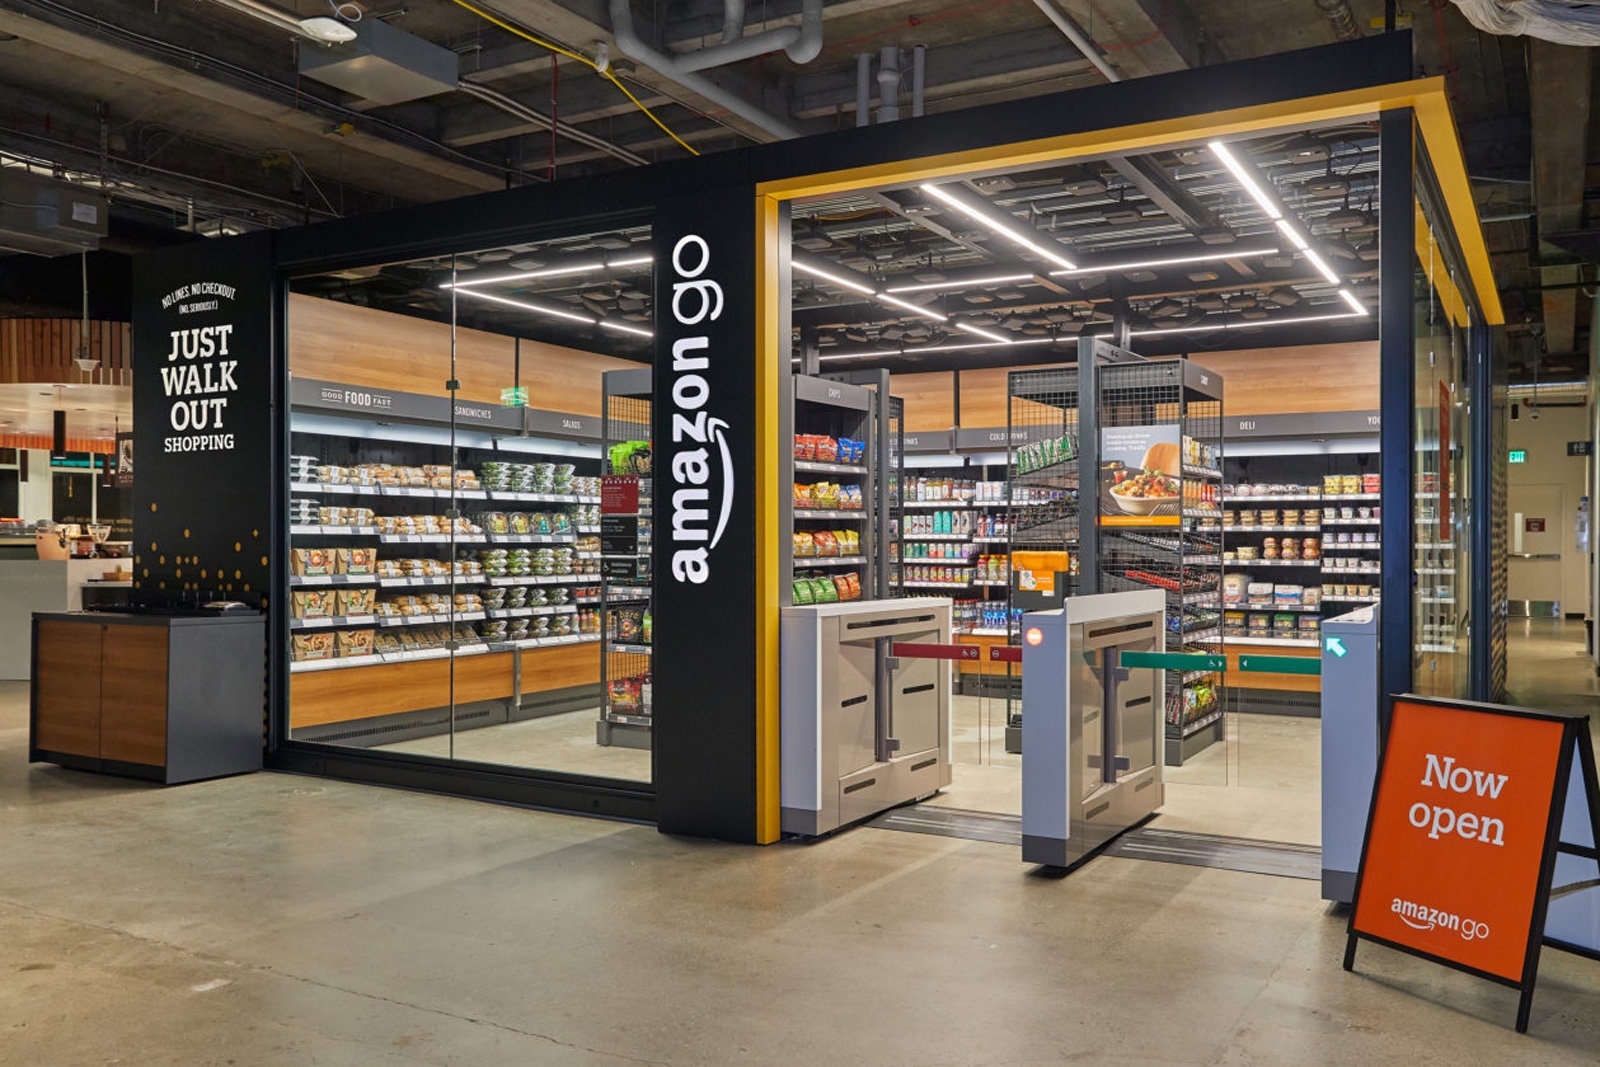 Amazon aims to open checkout-free Go stores in office lobbies | DeviceDaily.com